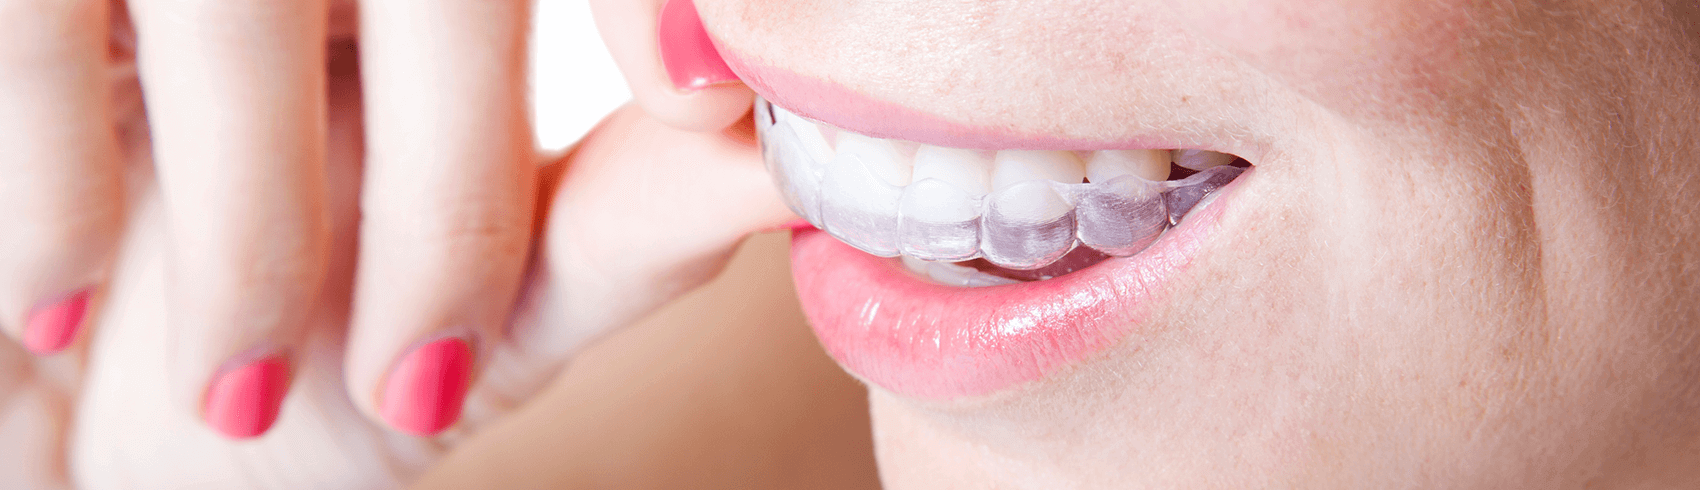 woman putting in her Invisalign